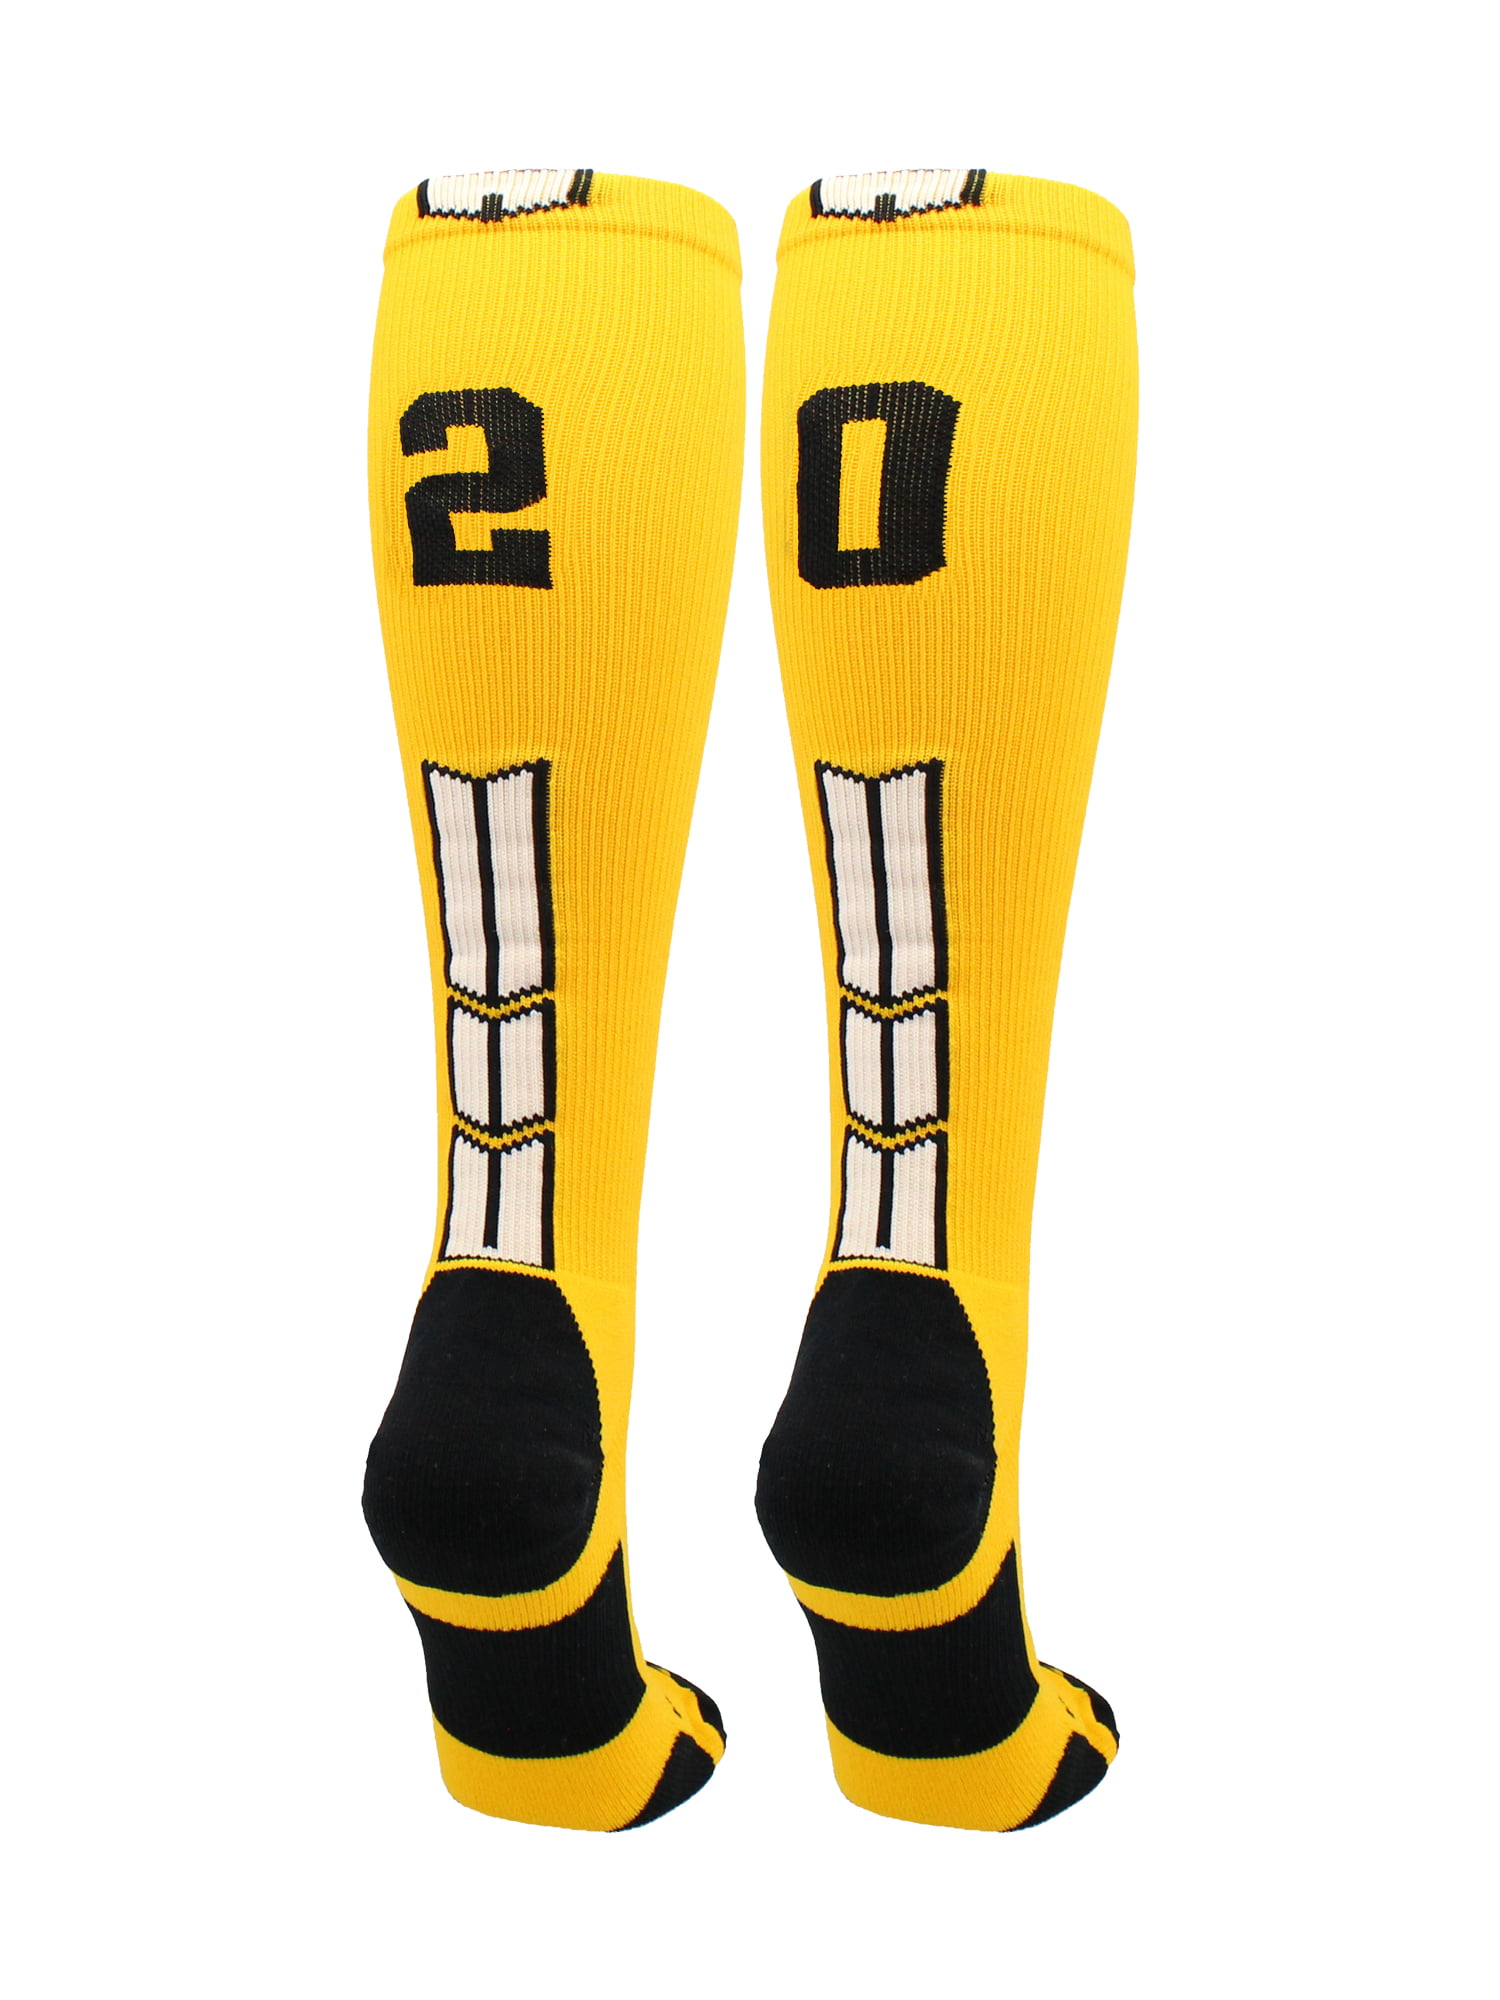 #20, Small MadSportsStuff Player Id Number Socks Over The Calf White Black 